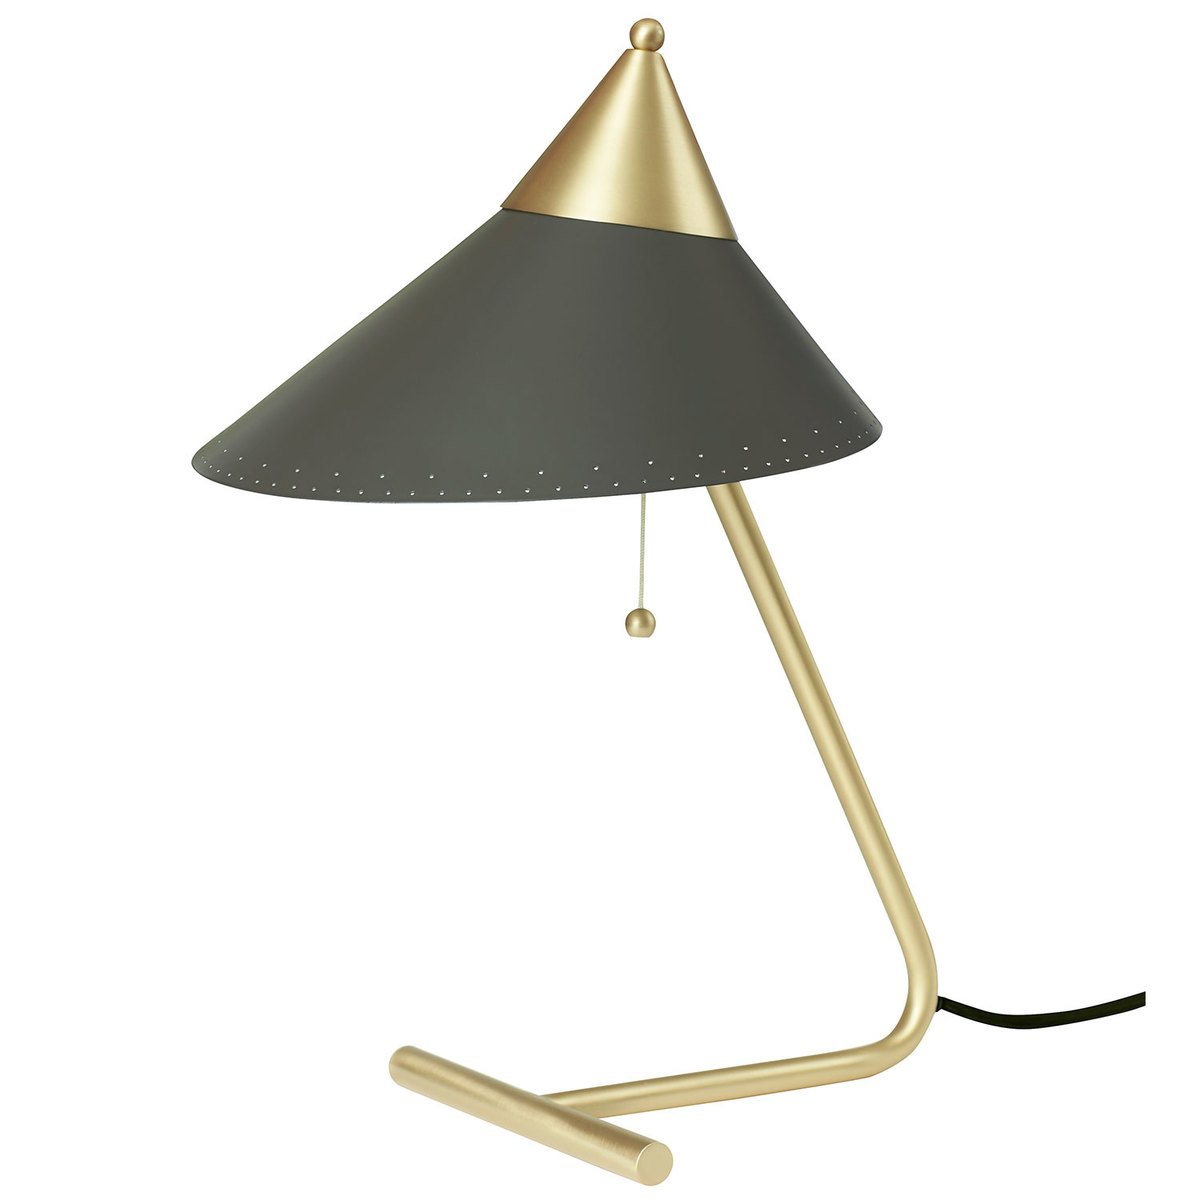 Warm Nordic Brass Top Table Lamp, Table Lamp Design Classic